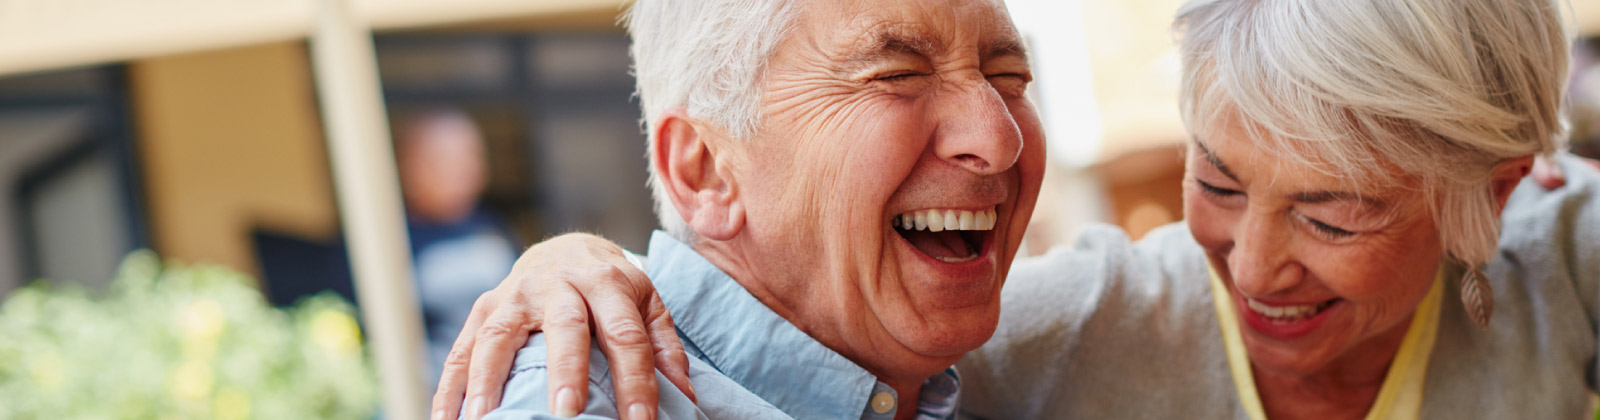 Older couple laughing together in joy. 